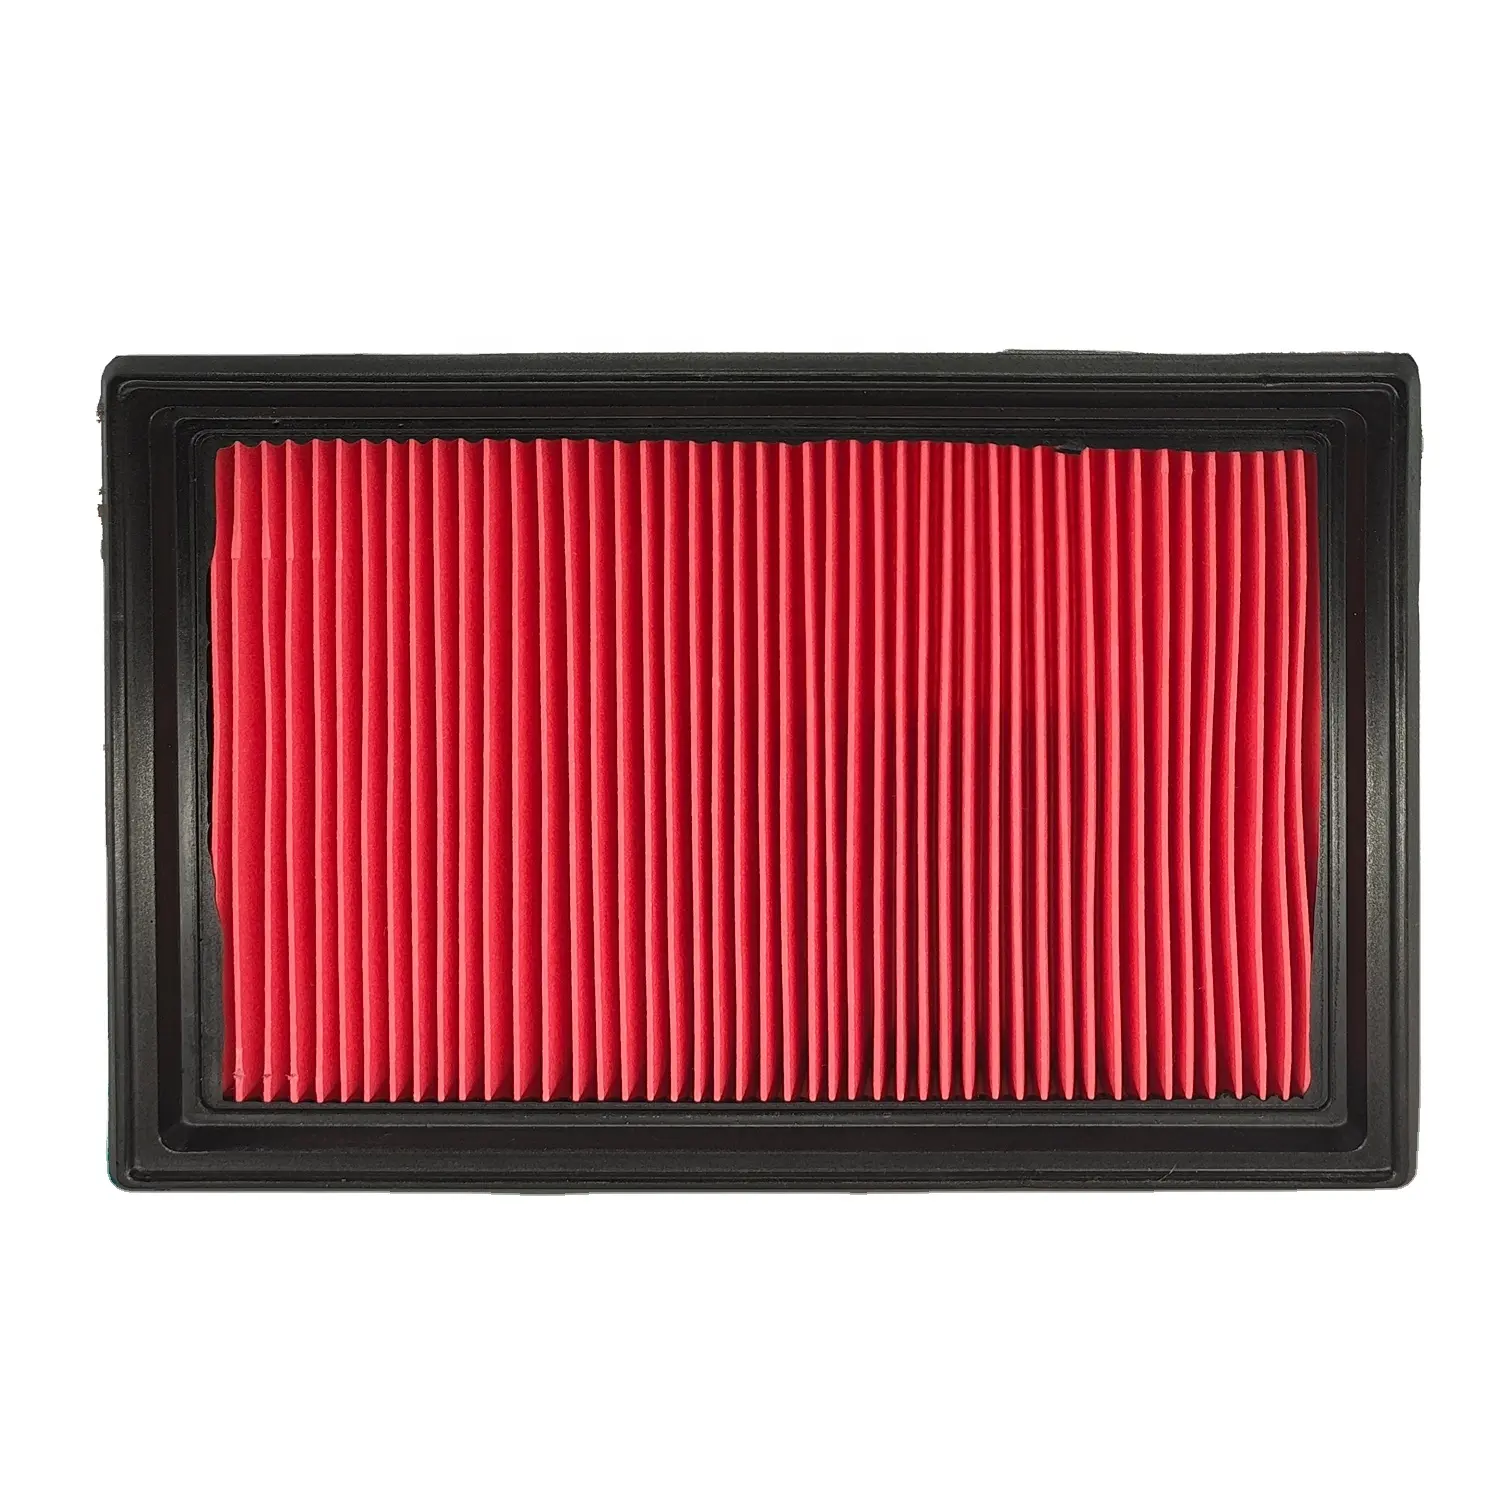 Air Filter for Honda Civic Nissan Infiniti G35 G37 16546-73C10 Dry Air intake ISO 9001, CE by Hellper